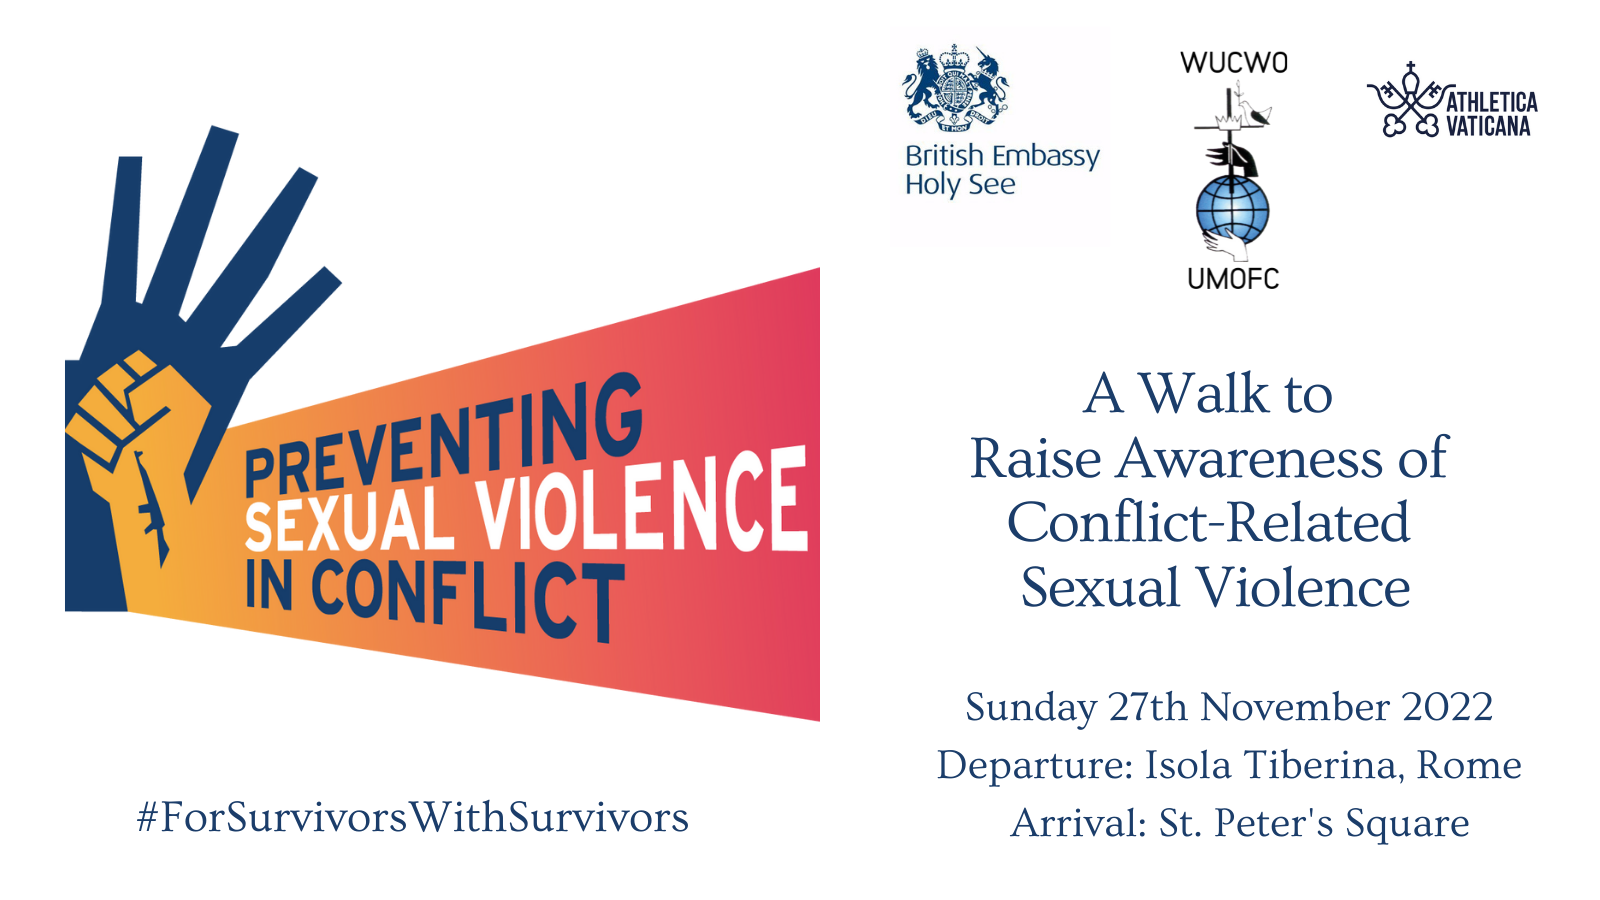 Twitter Post - A Walk to Raise Awareness of Conflict-Related Sexual Violence (6).png